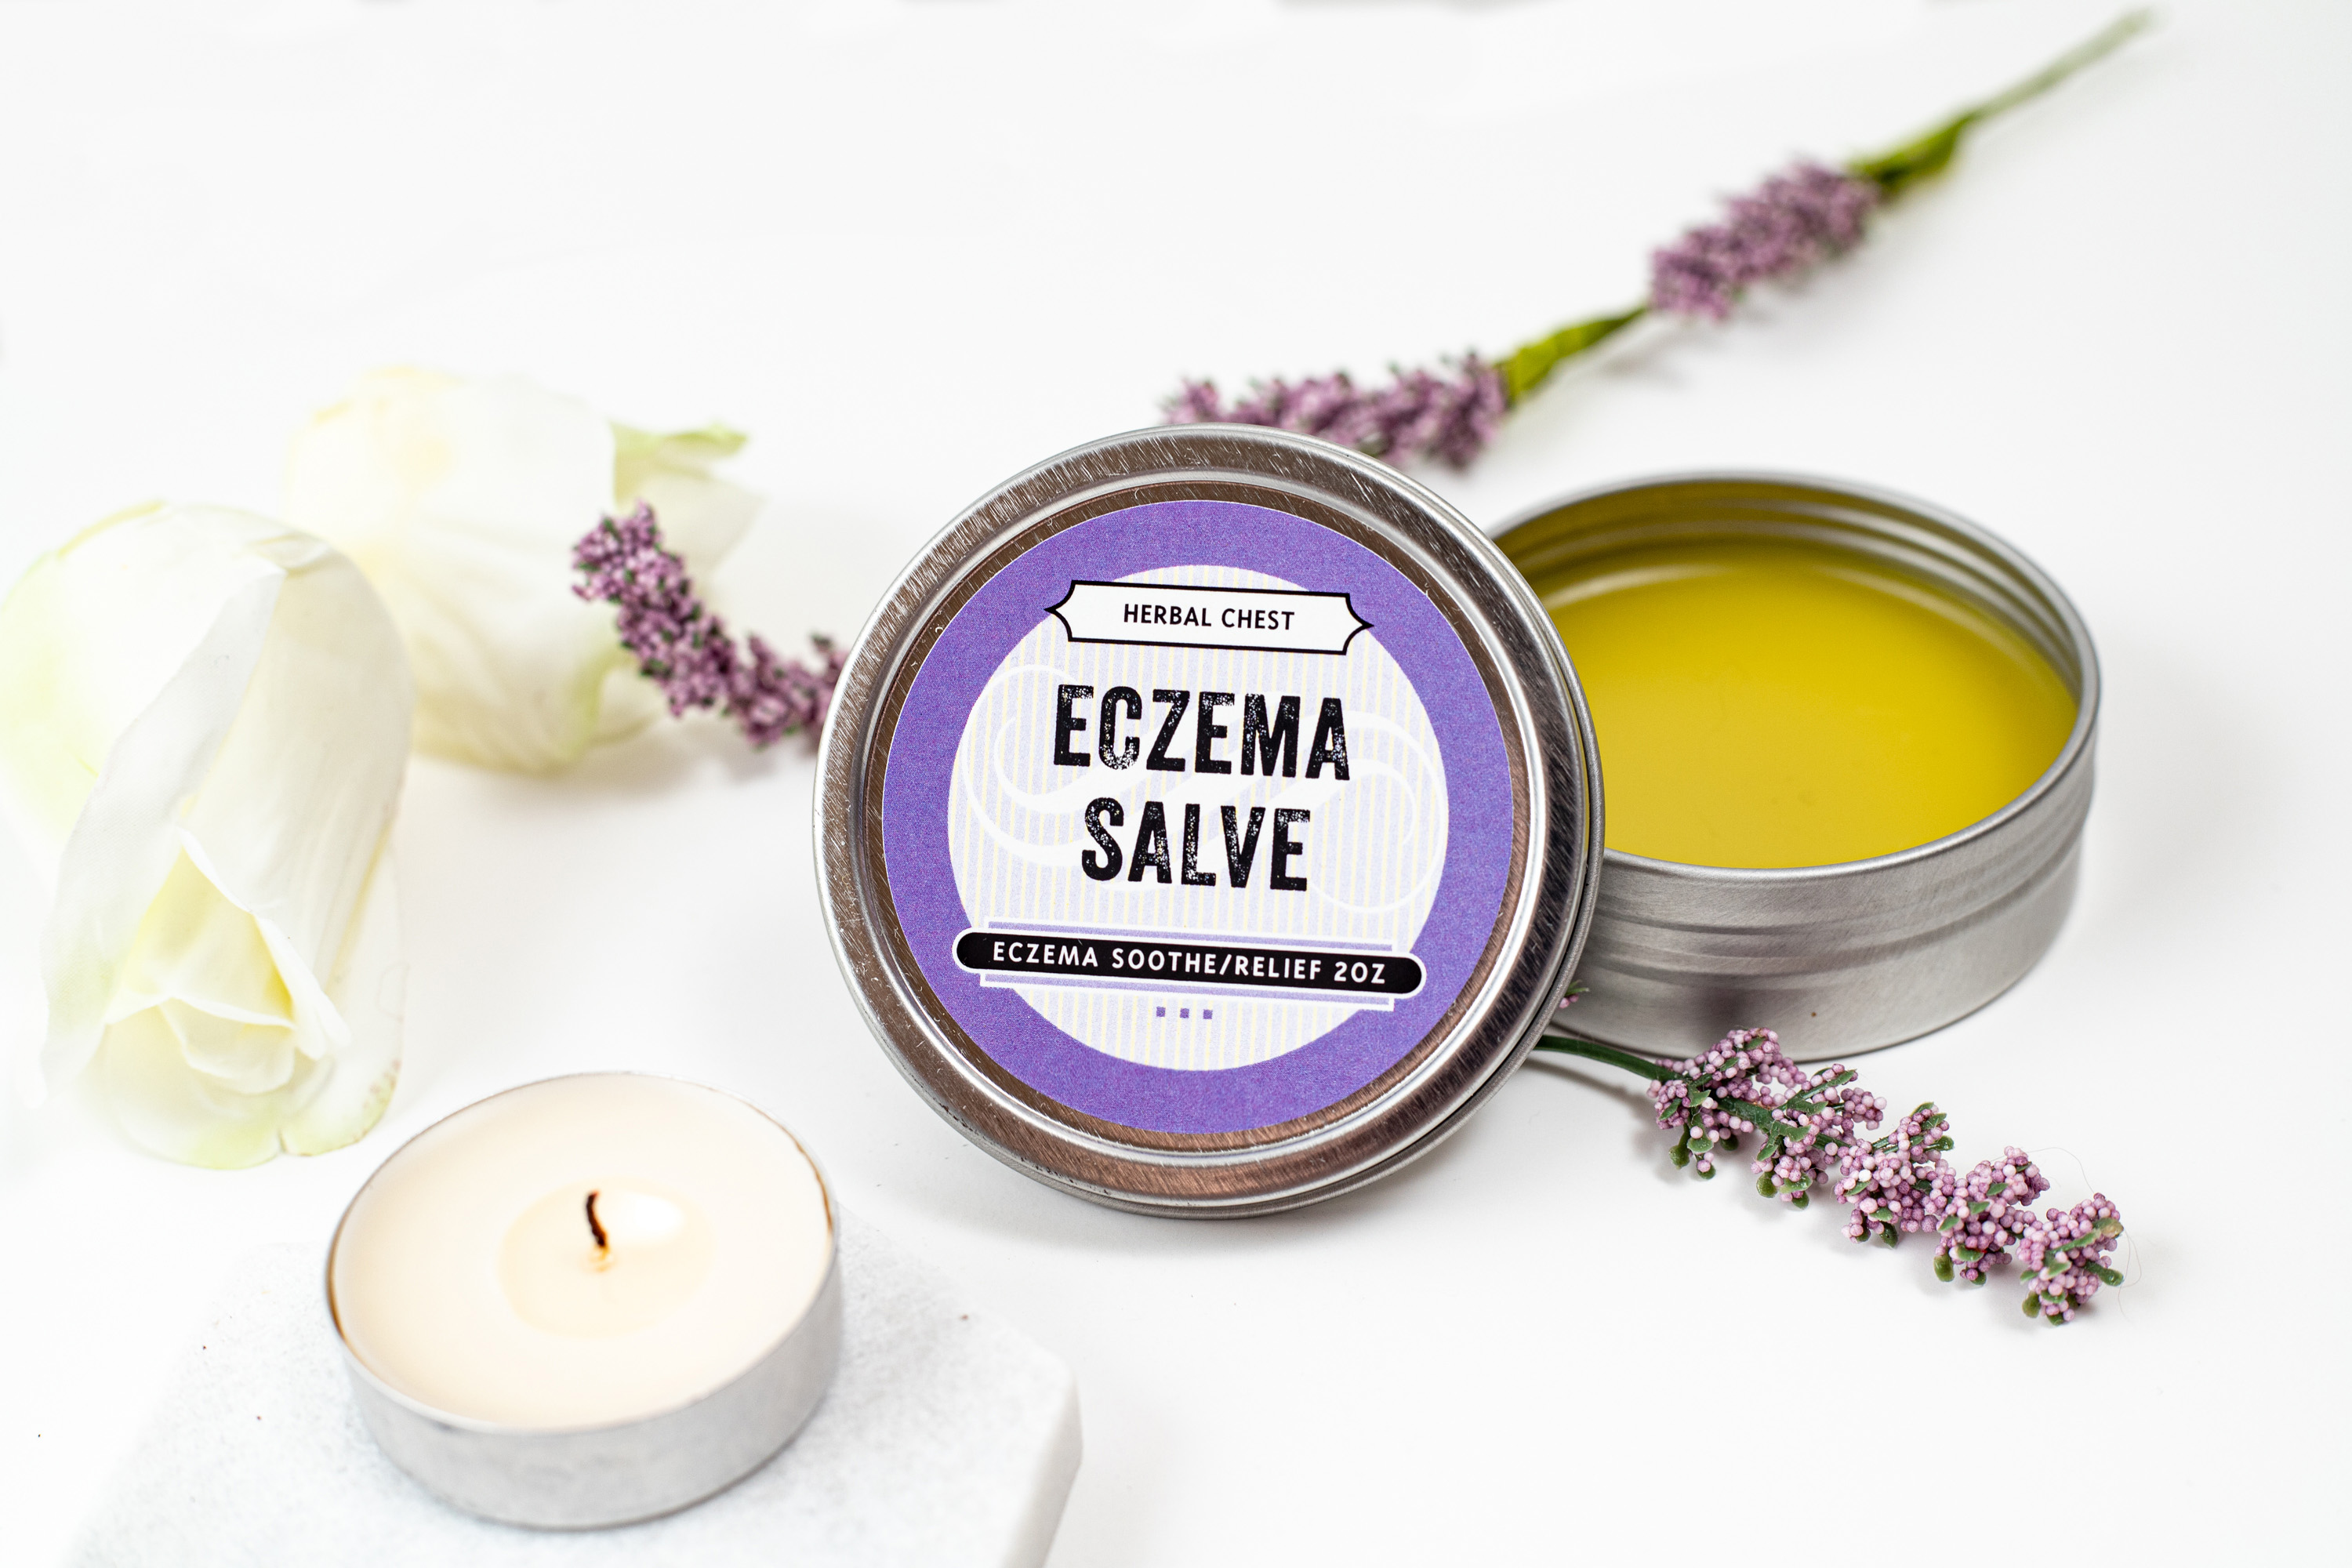 Unscented Natural Eczema Salve 2oz by Herbal Chest